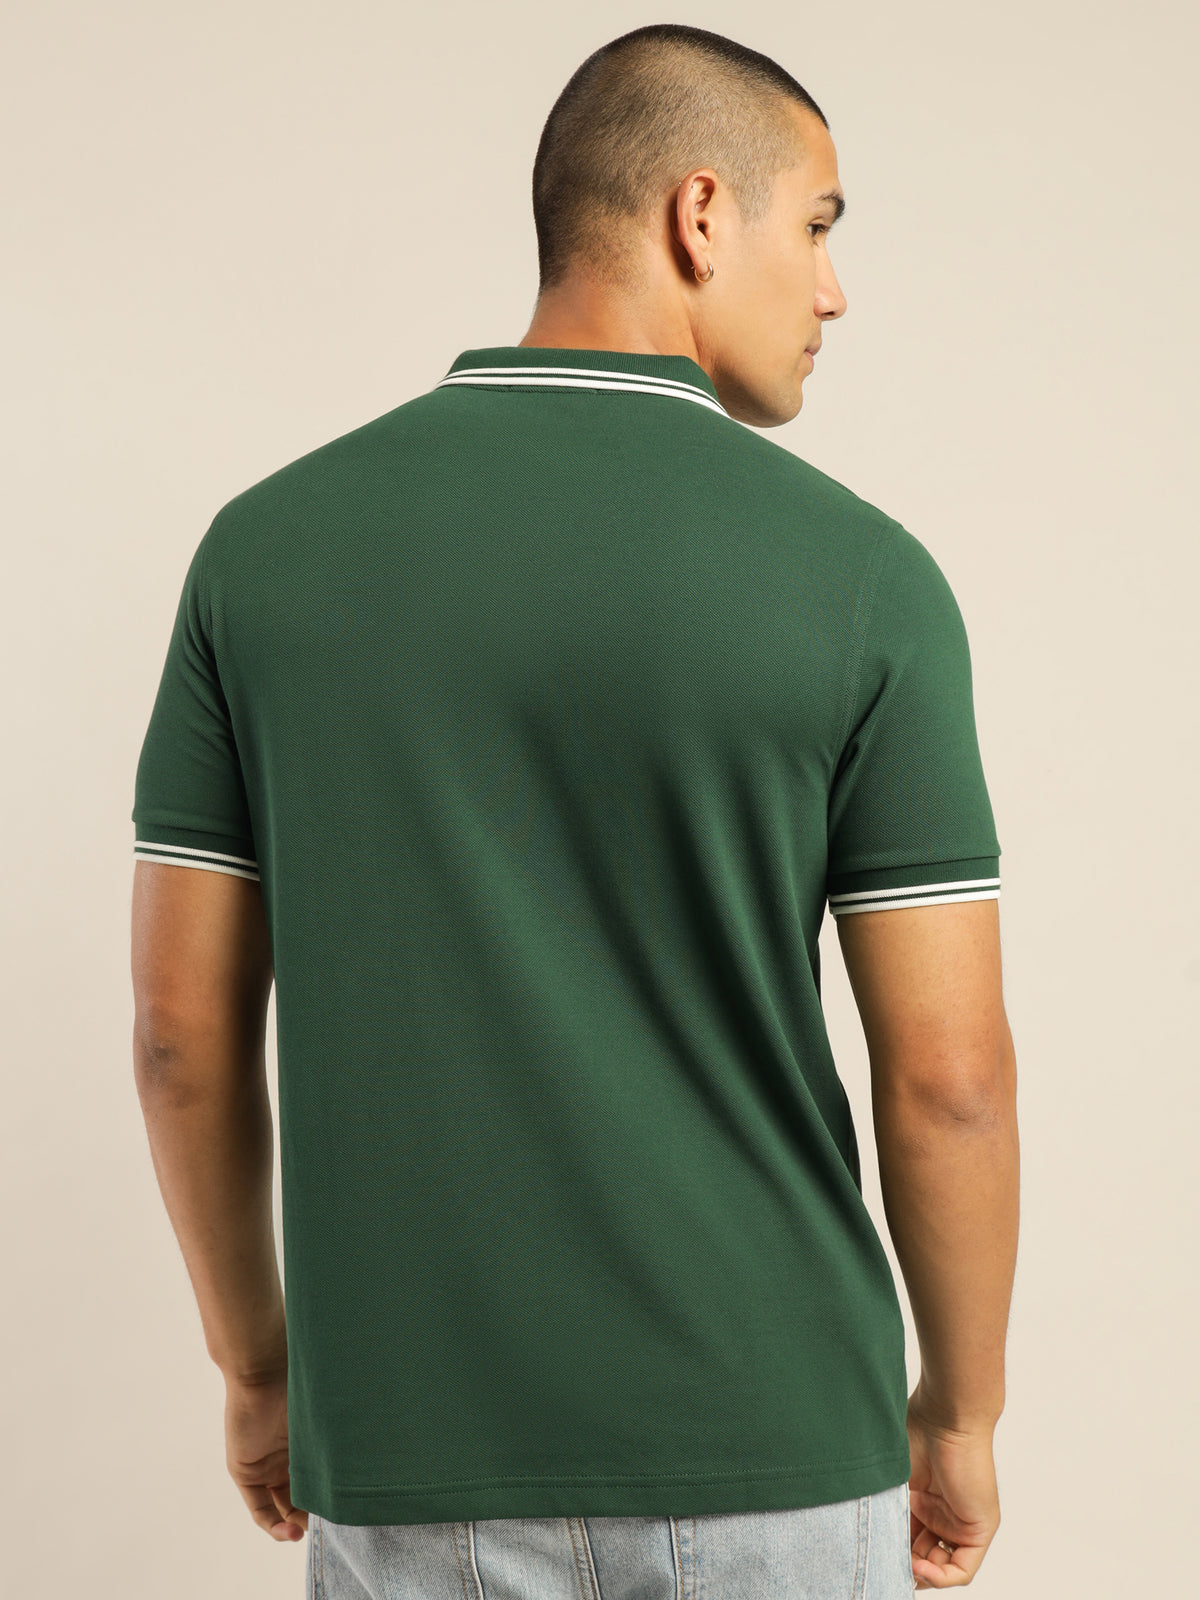 Twin Tipped Polo Shirt in Ivy